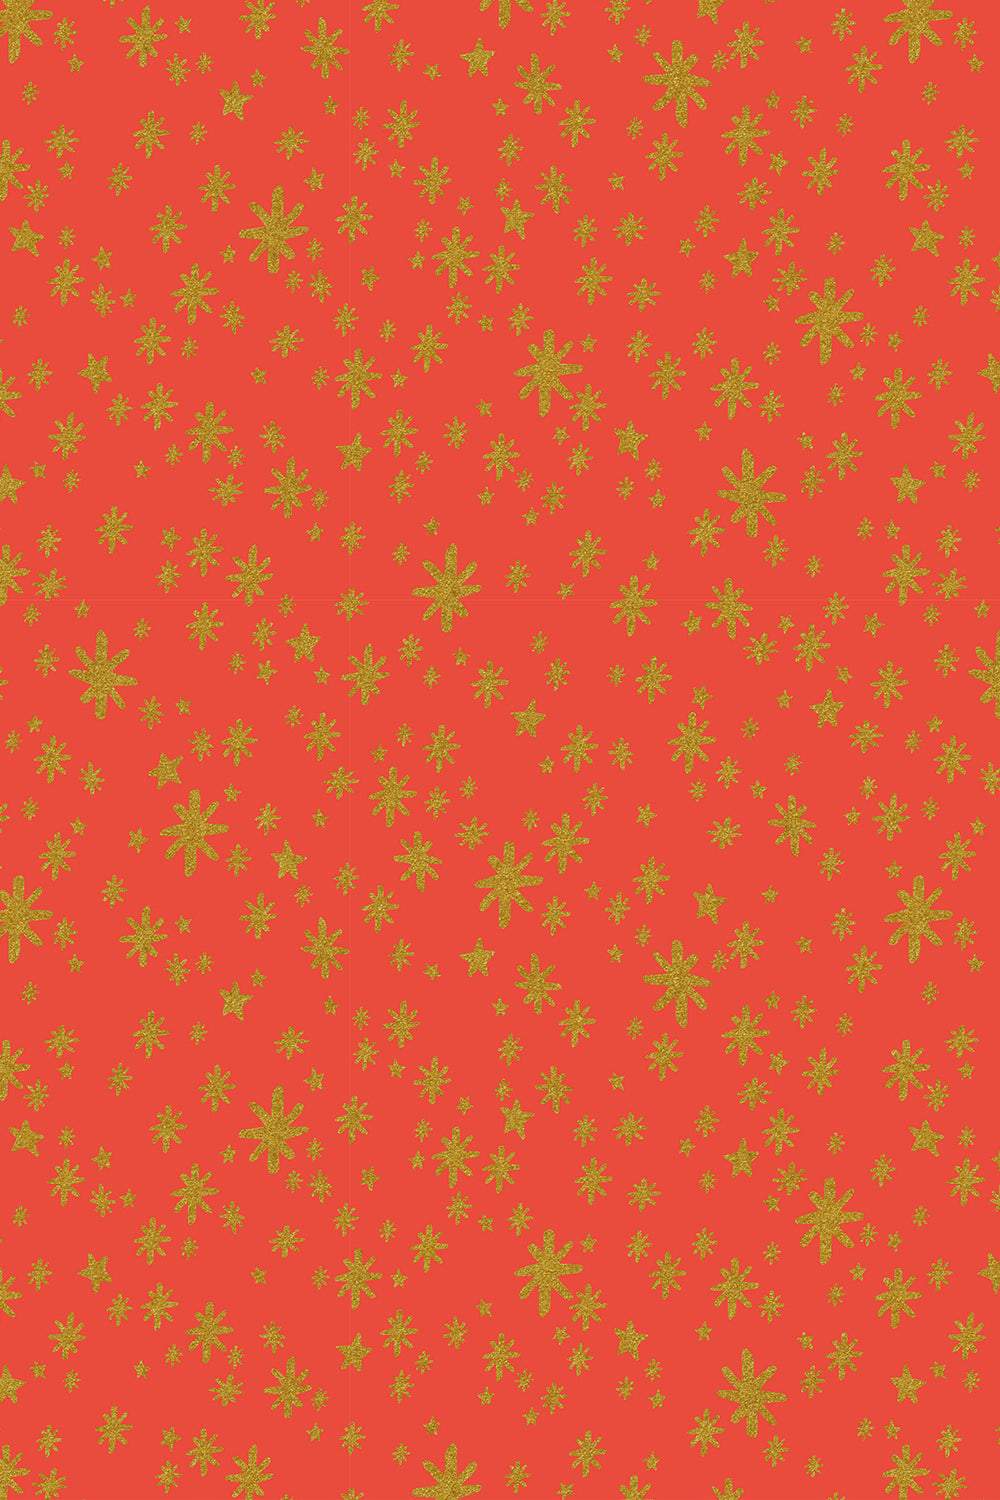 Holiday Classics Starry Night By Rifle Paper Co. For Cotton + Steel Red / Metallic